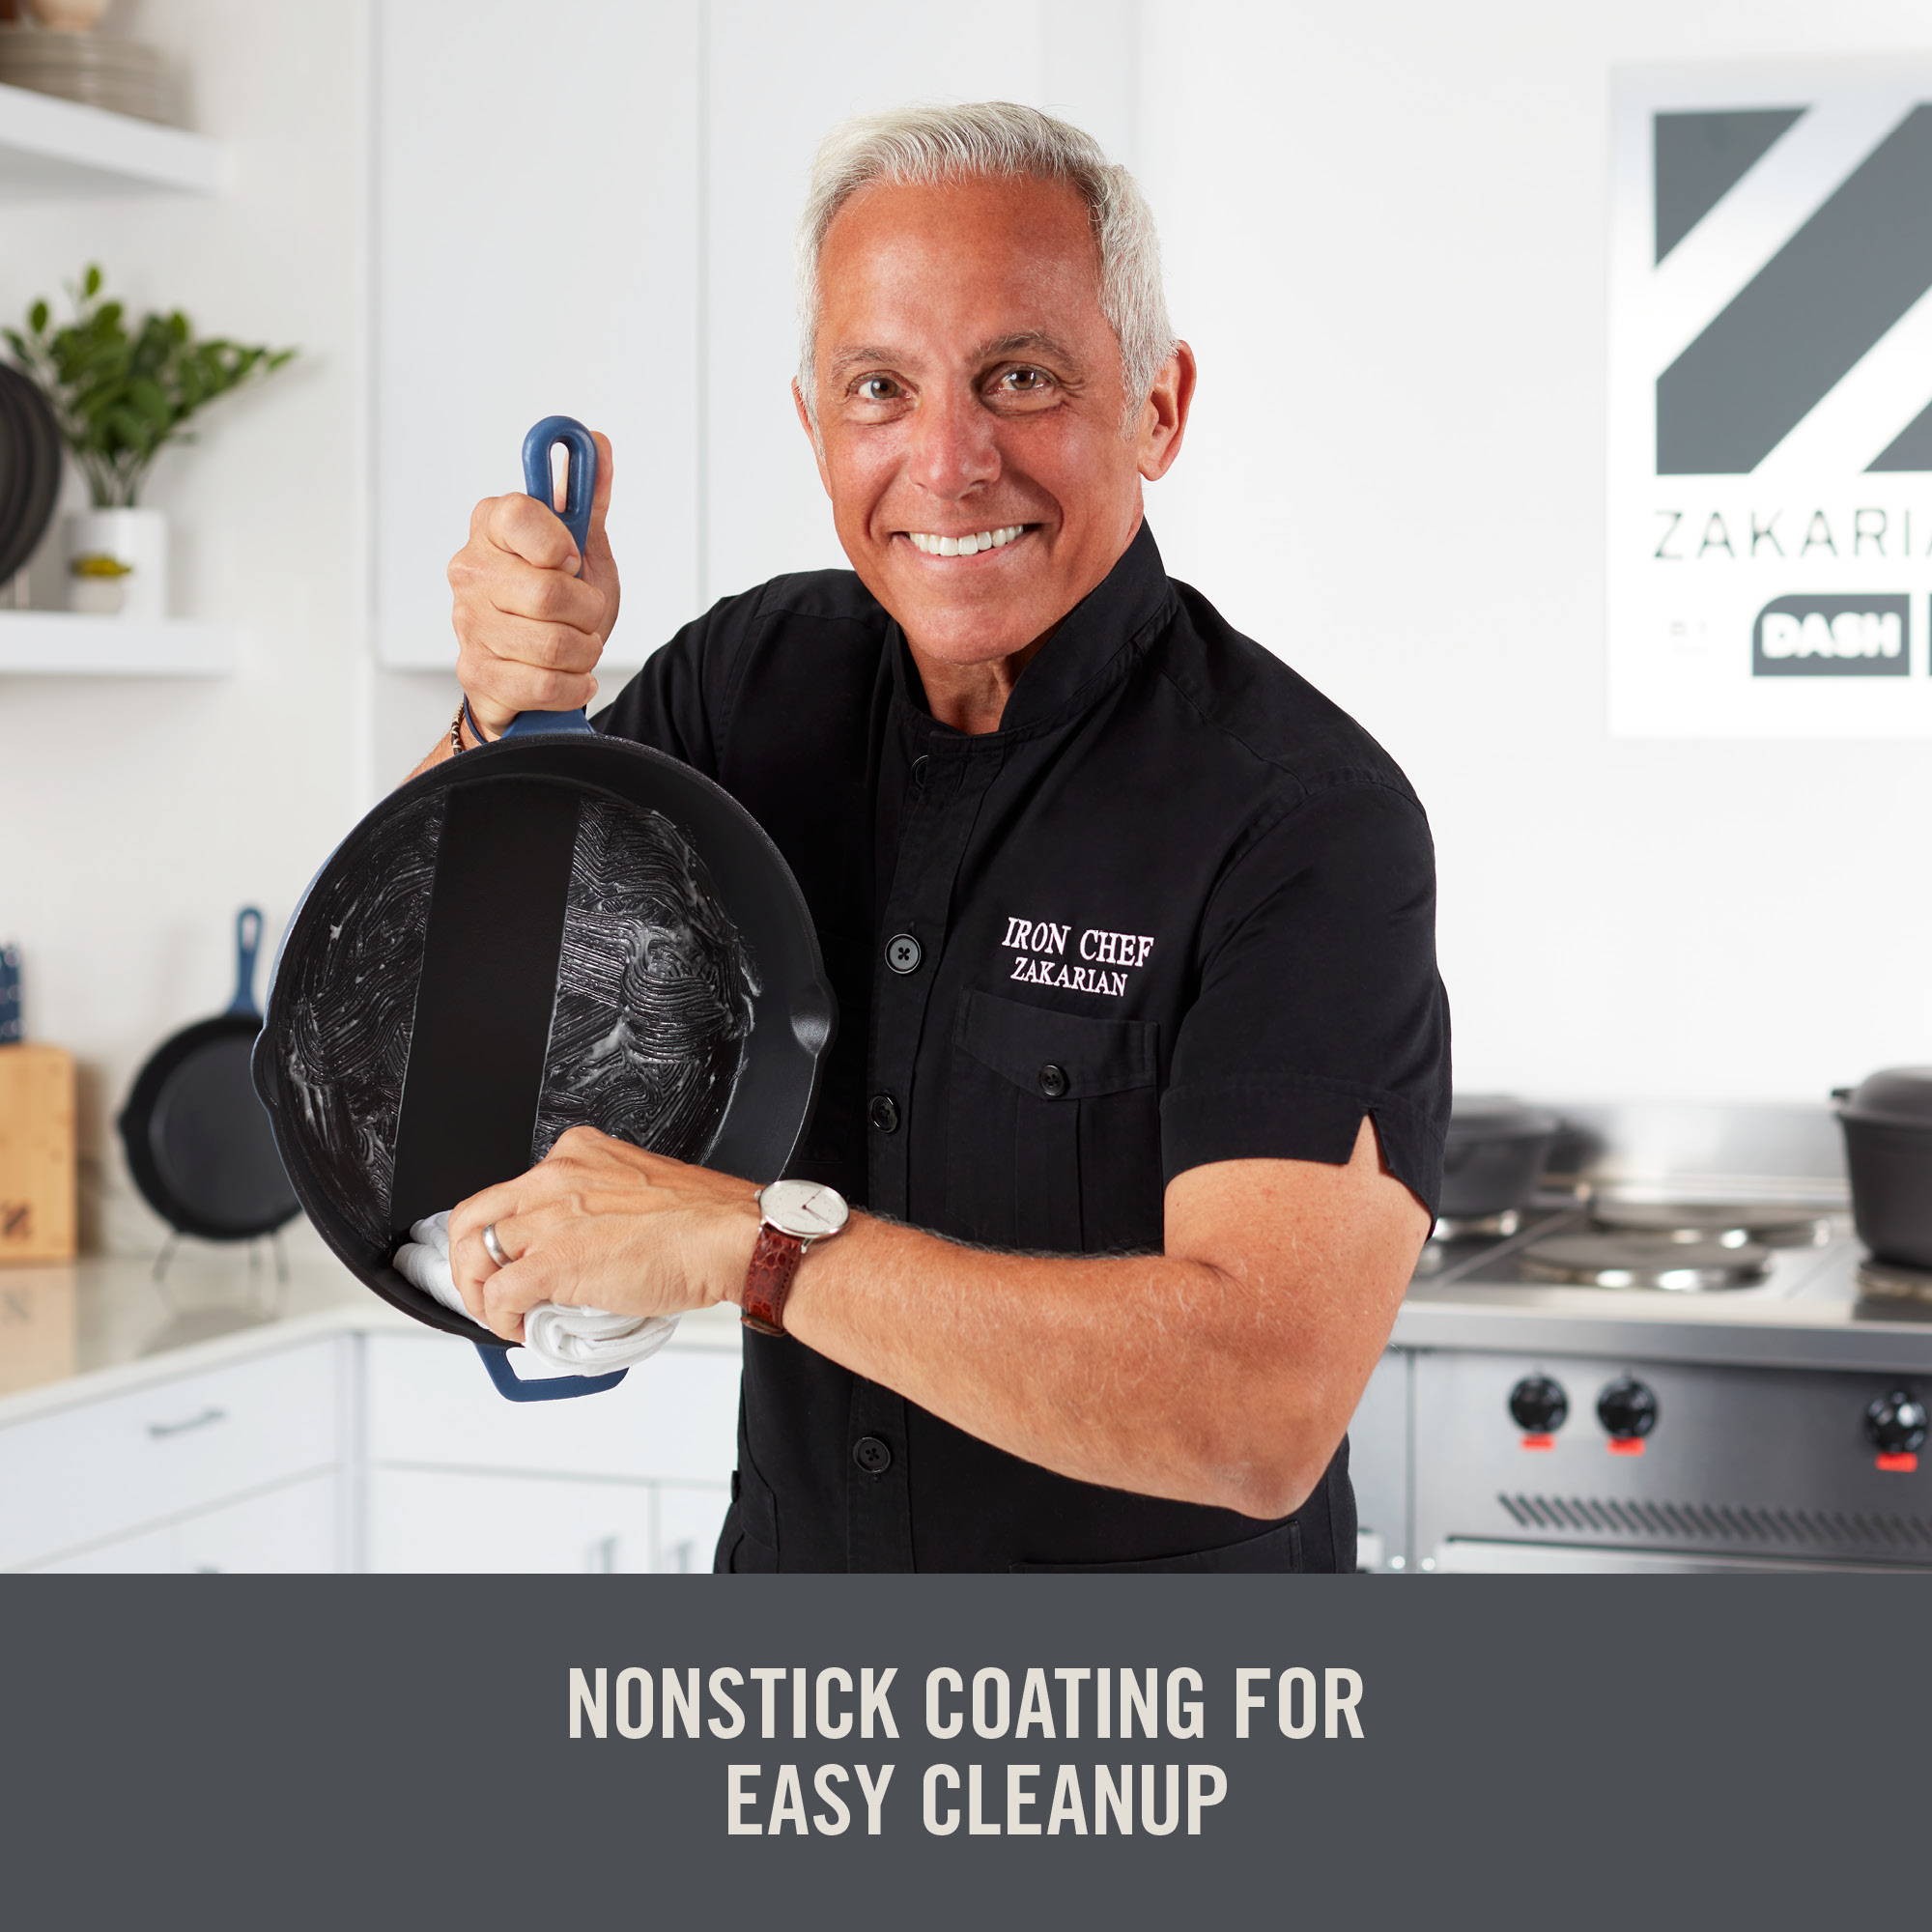 Nonstick coating for easy cleanup